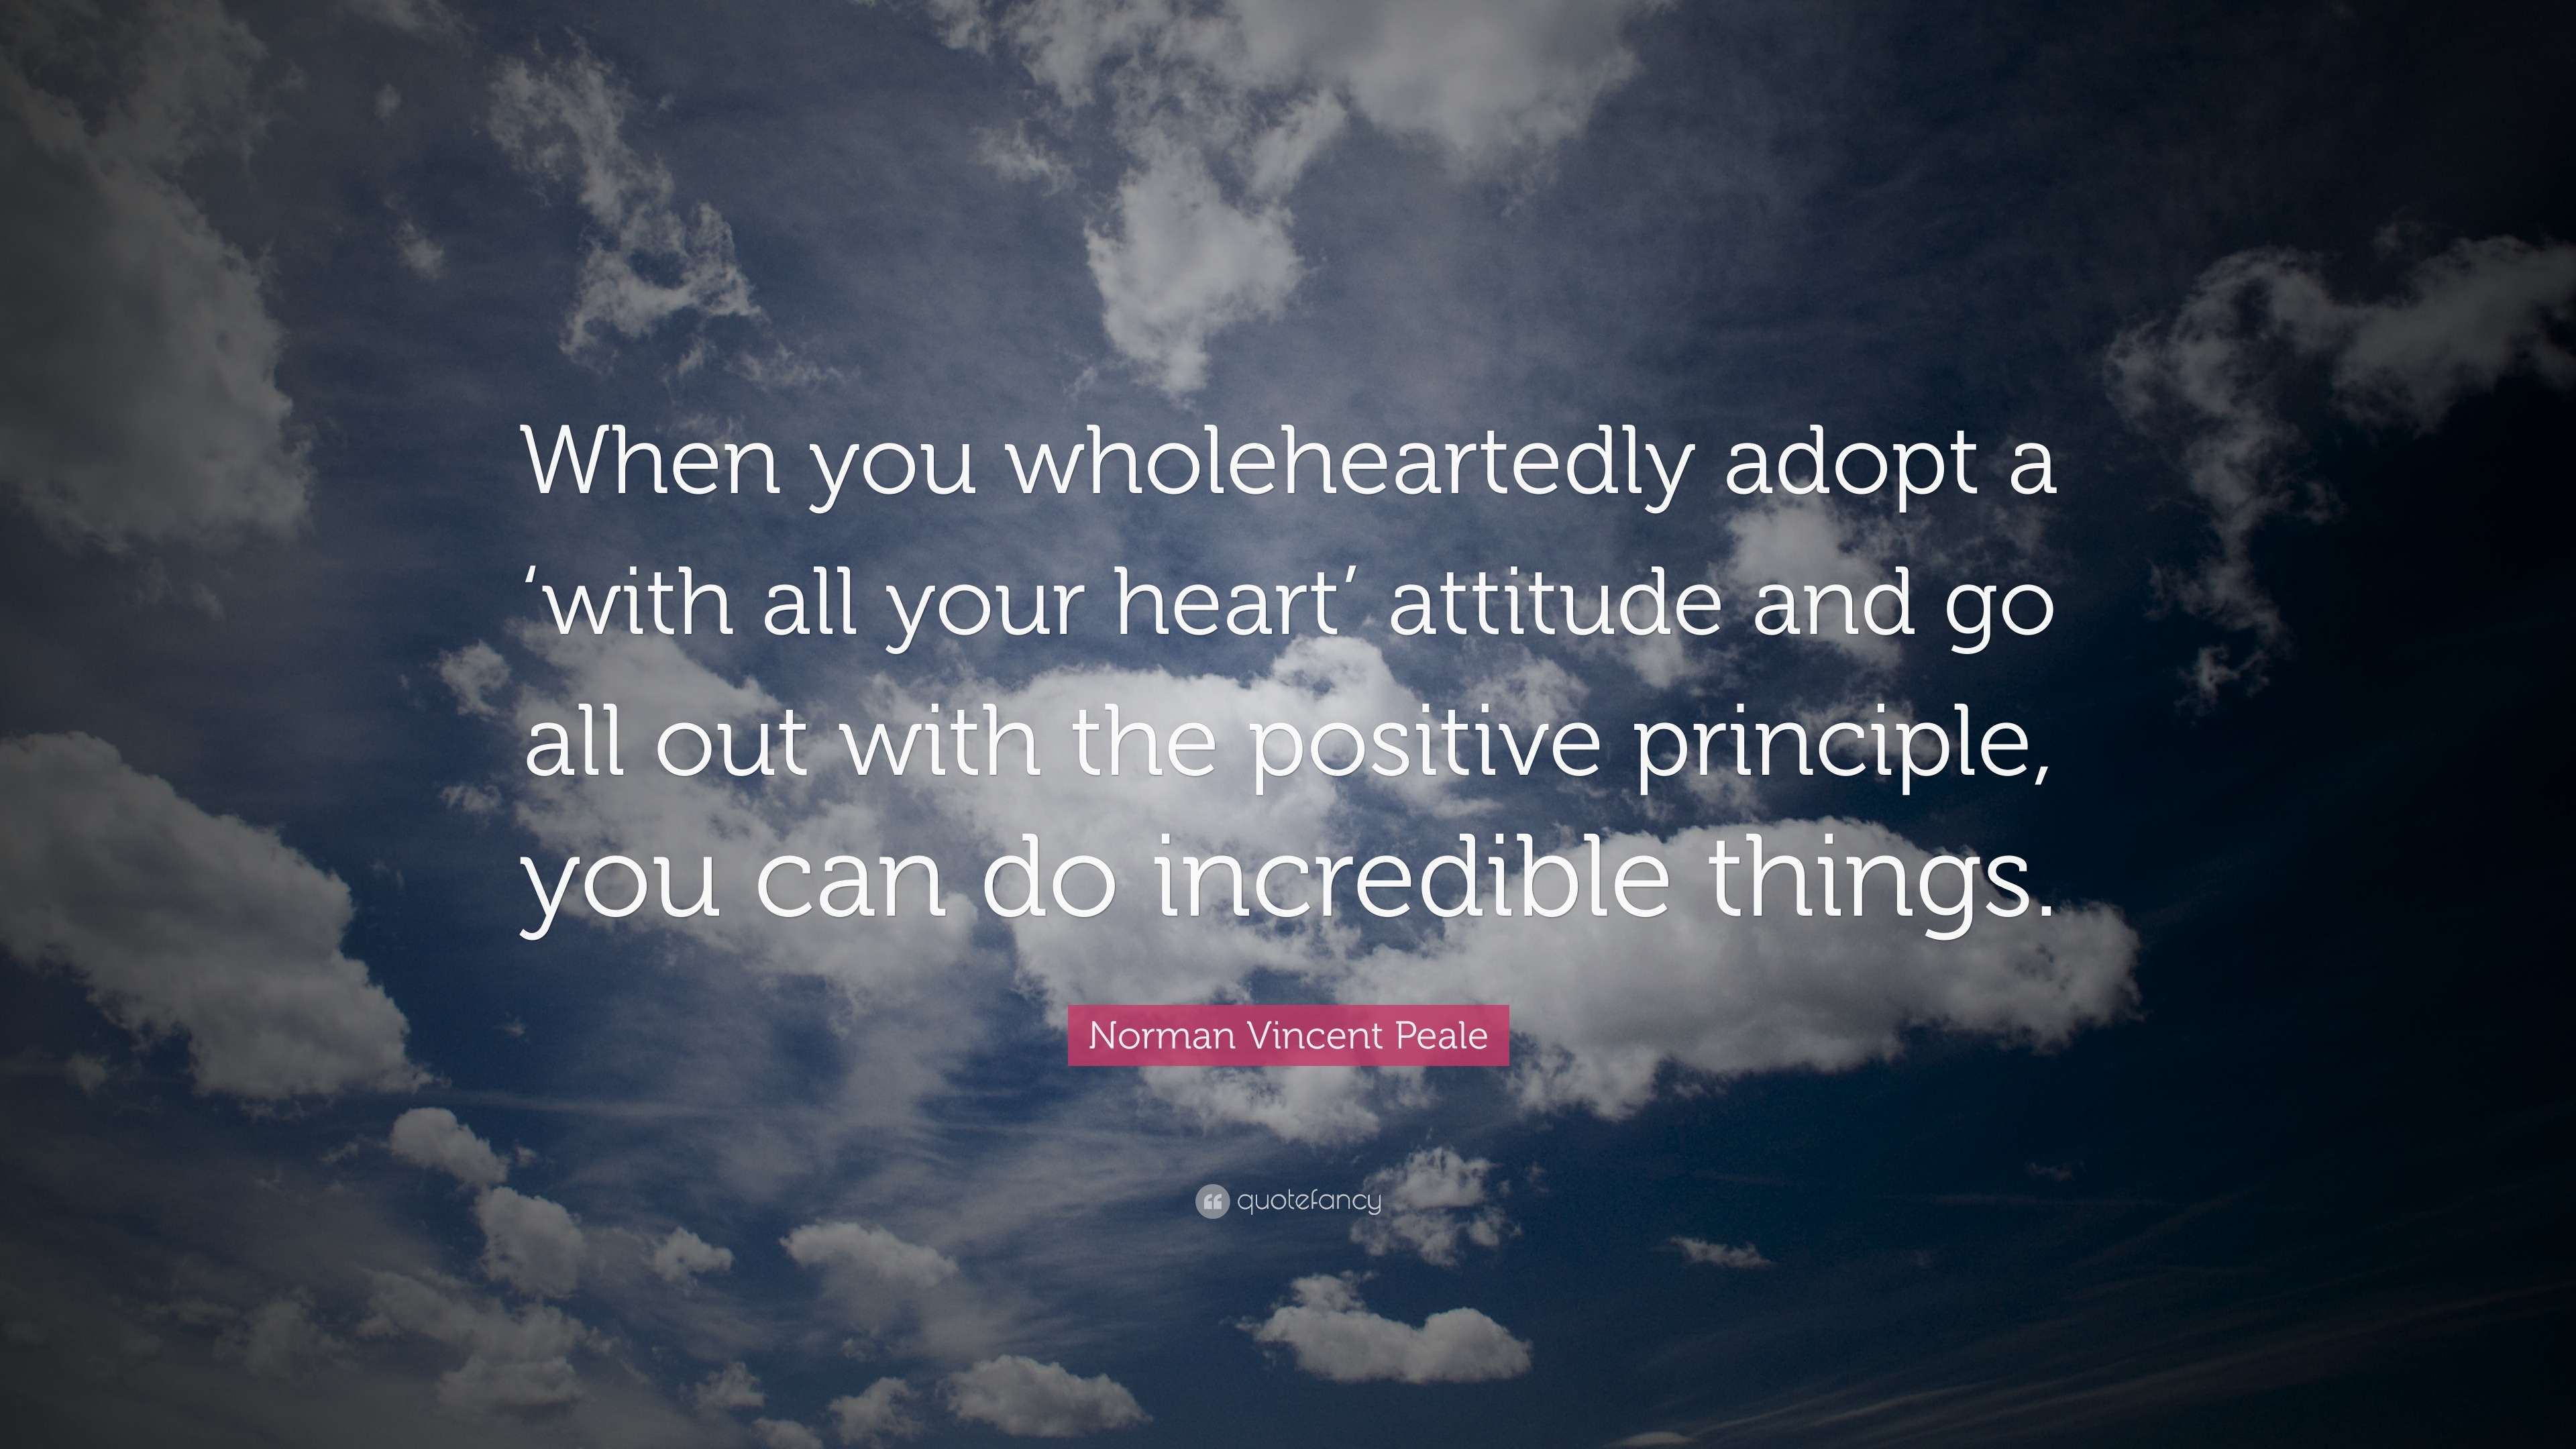 Norman Vincent Peale Quote: “When you wholeheartedly adopt a ‘with all